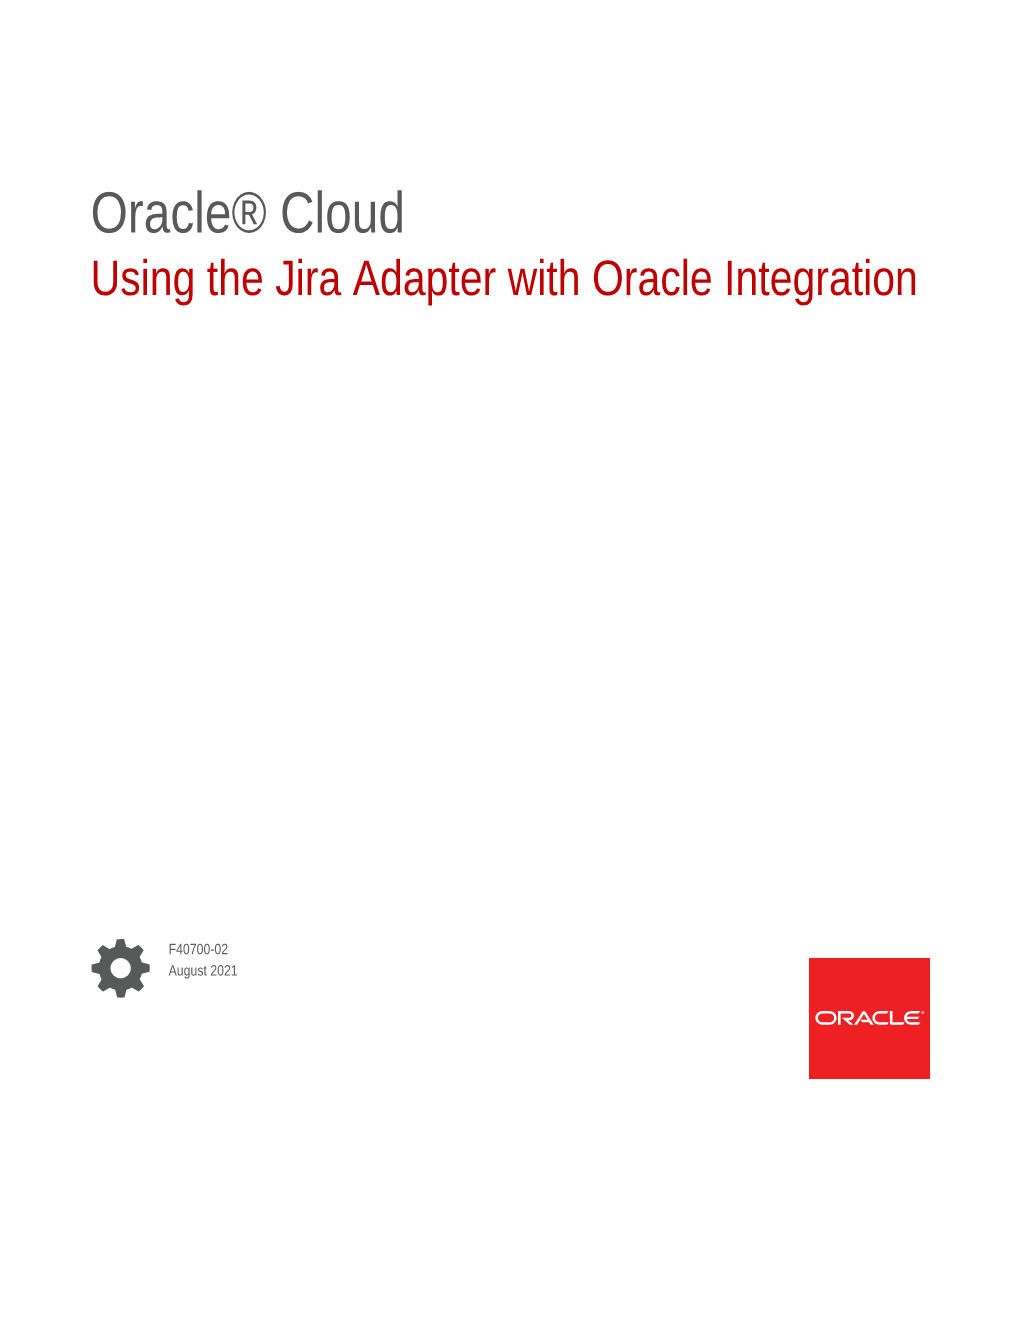 Using the Jira Adapter with Oracle Integration